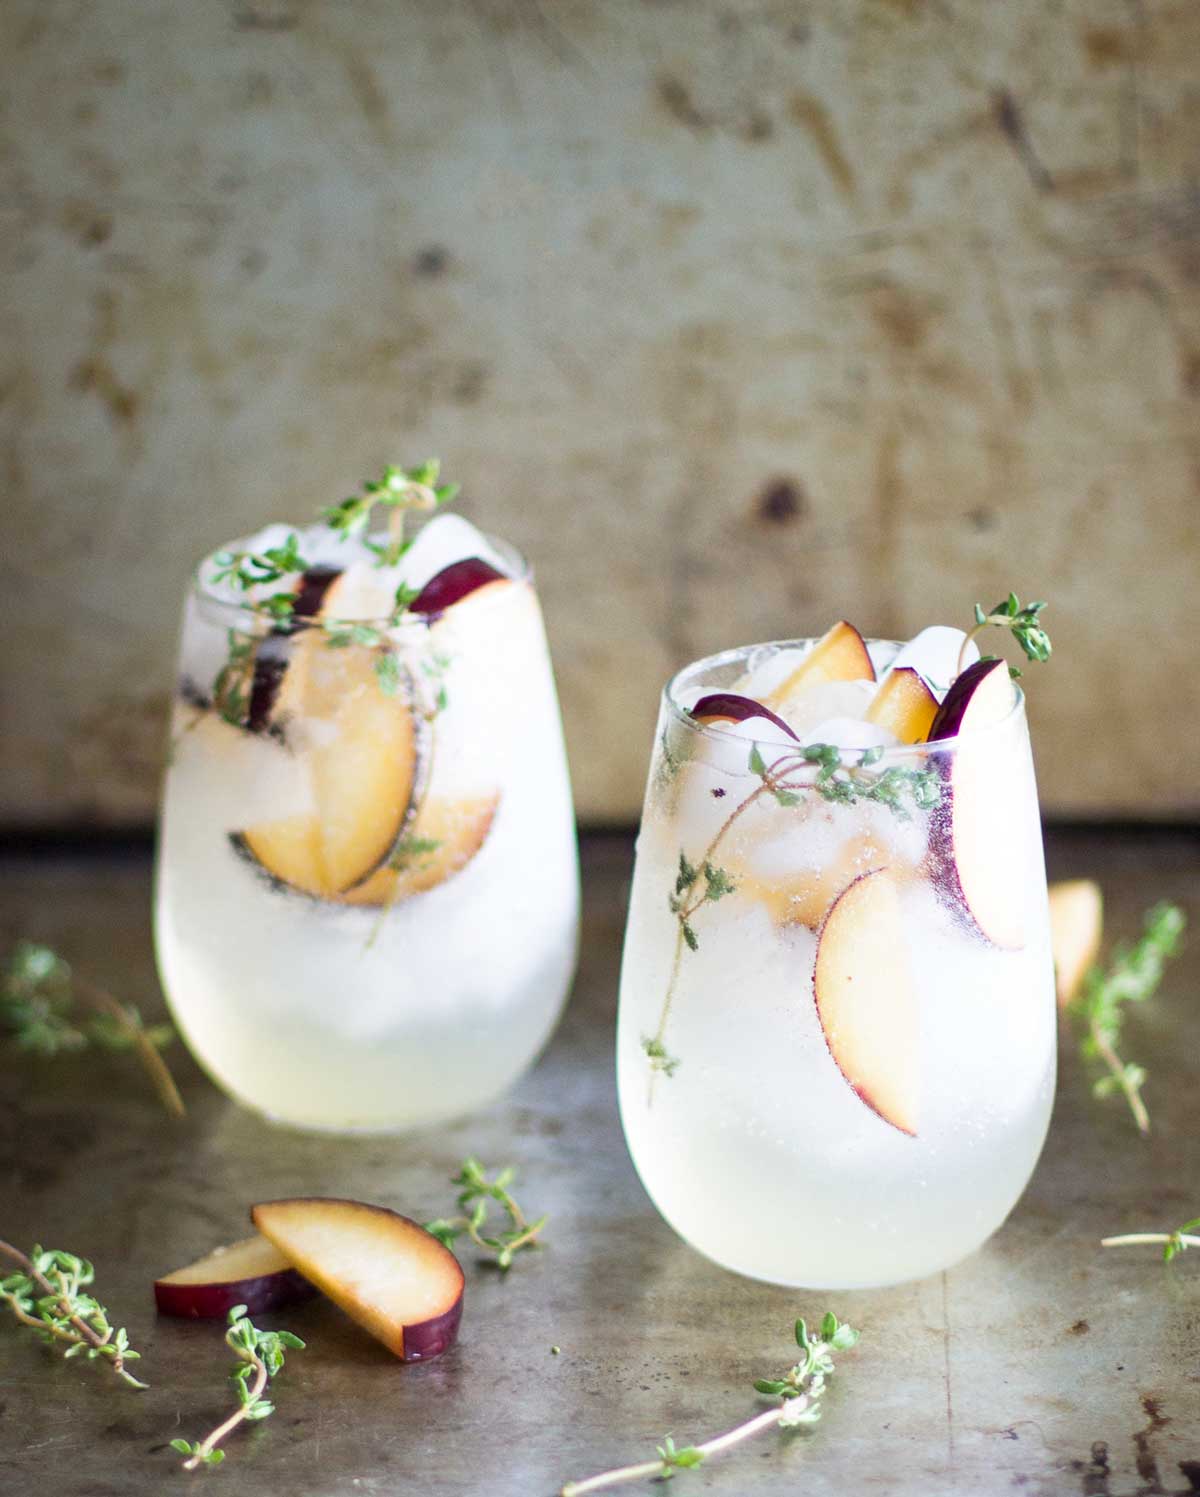 Plum and Thyme Prosecco Smash Fall Cocktails: Recipes for the Perfect Drink